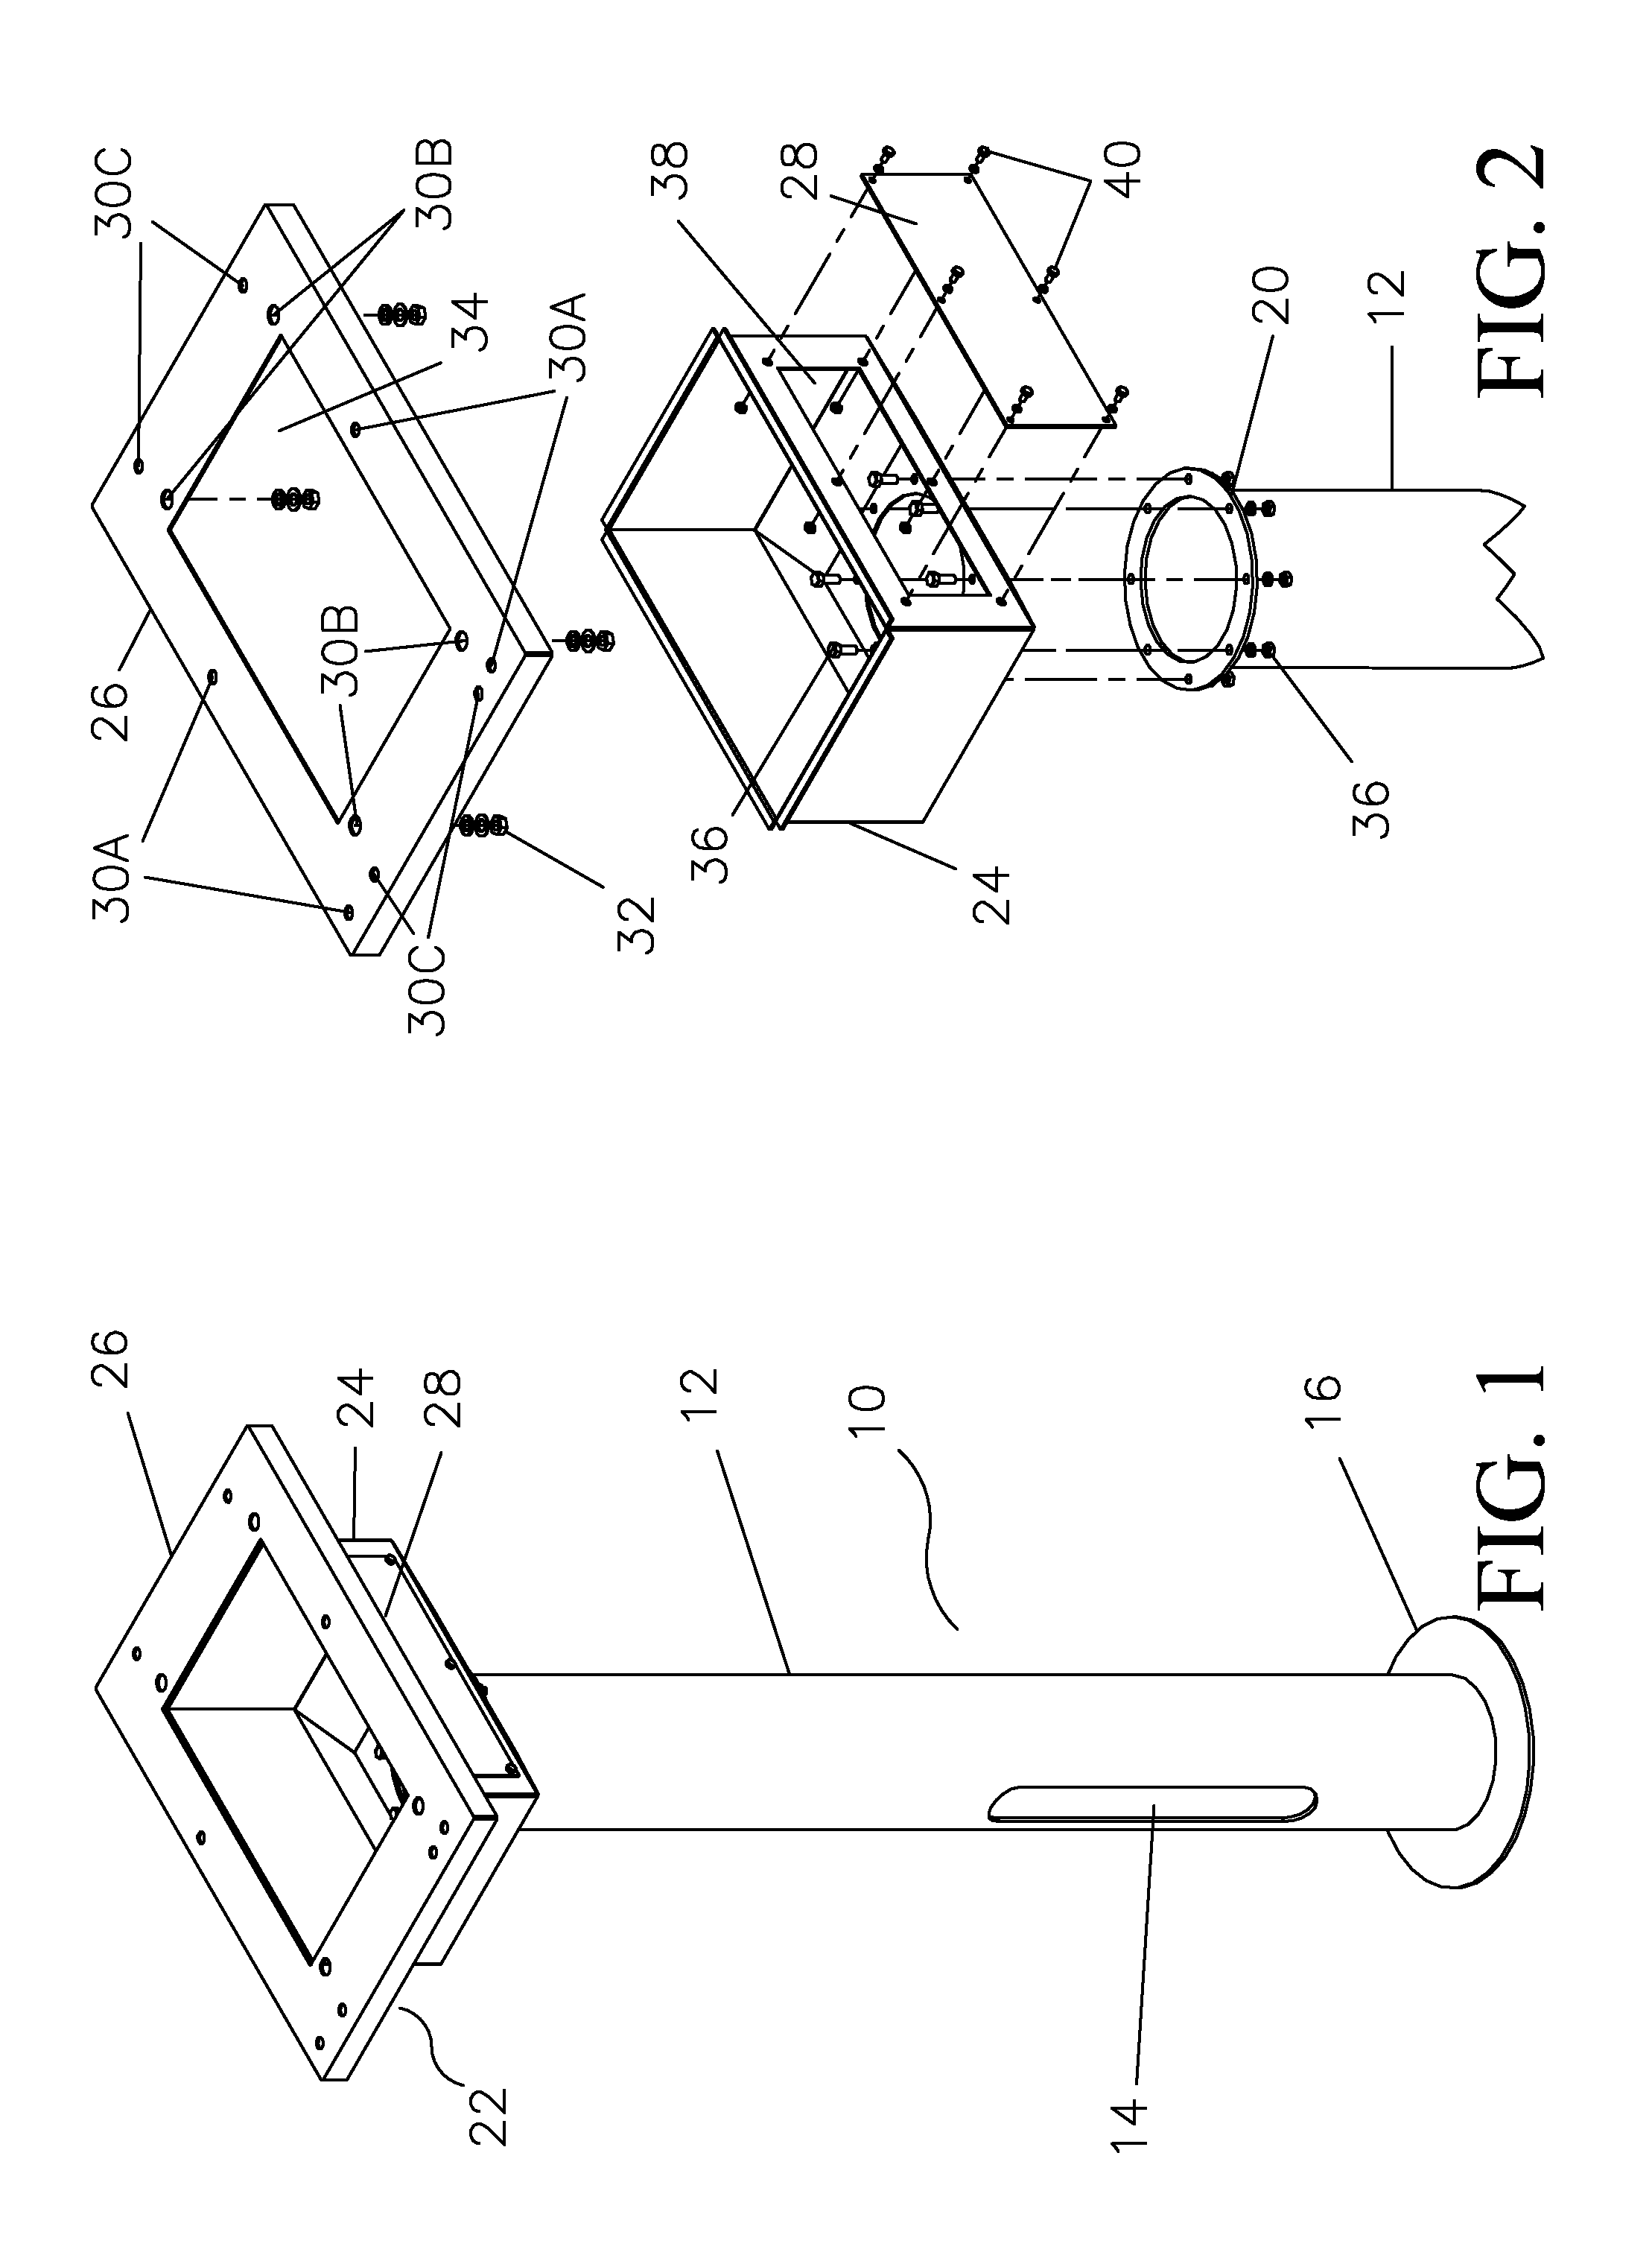 Apparatus and method for mounting of cabinets